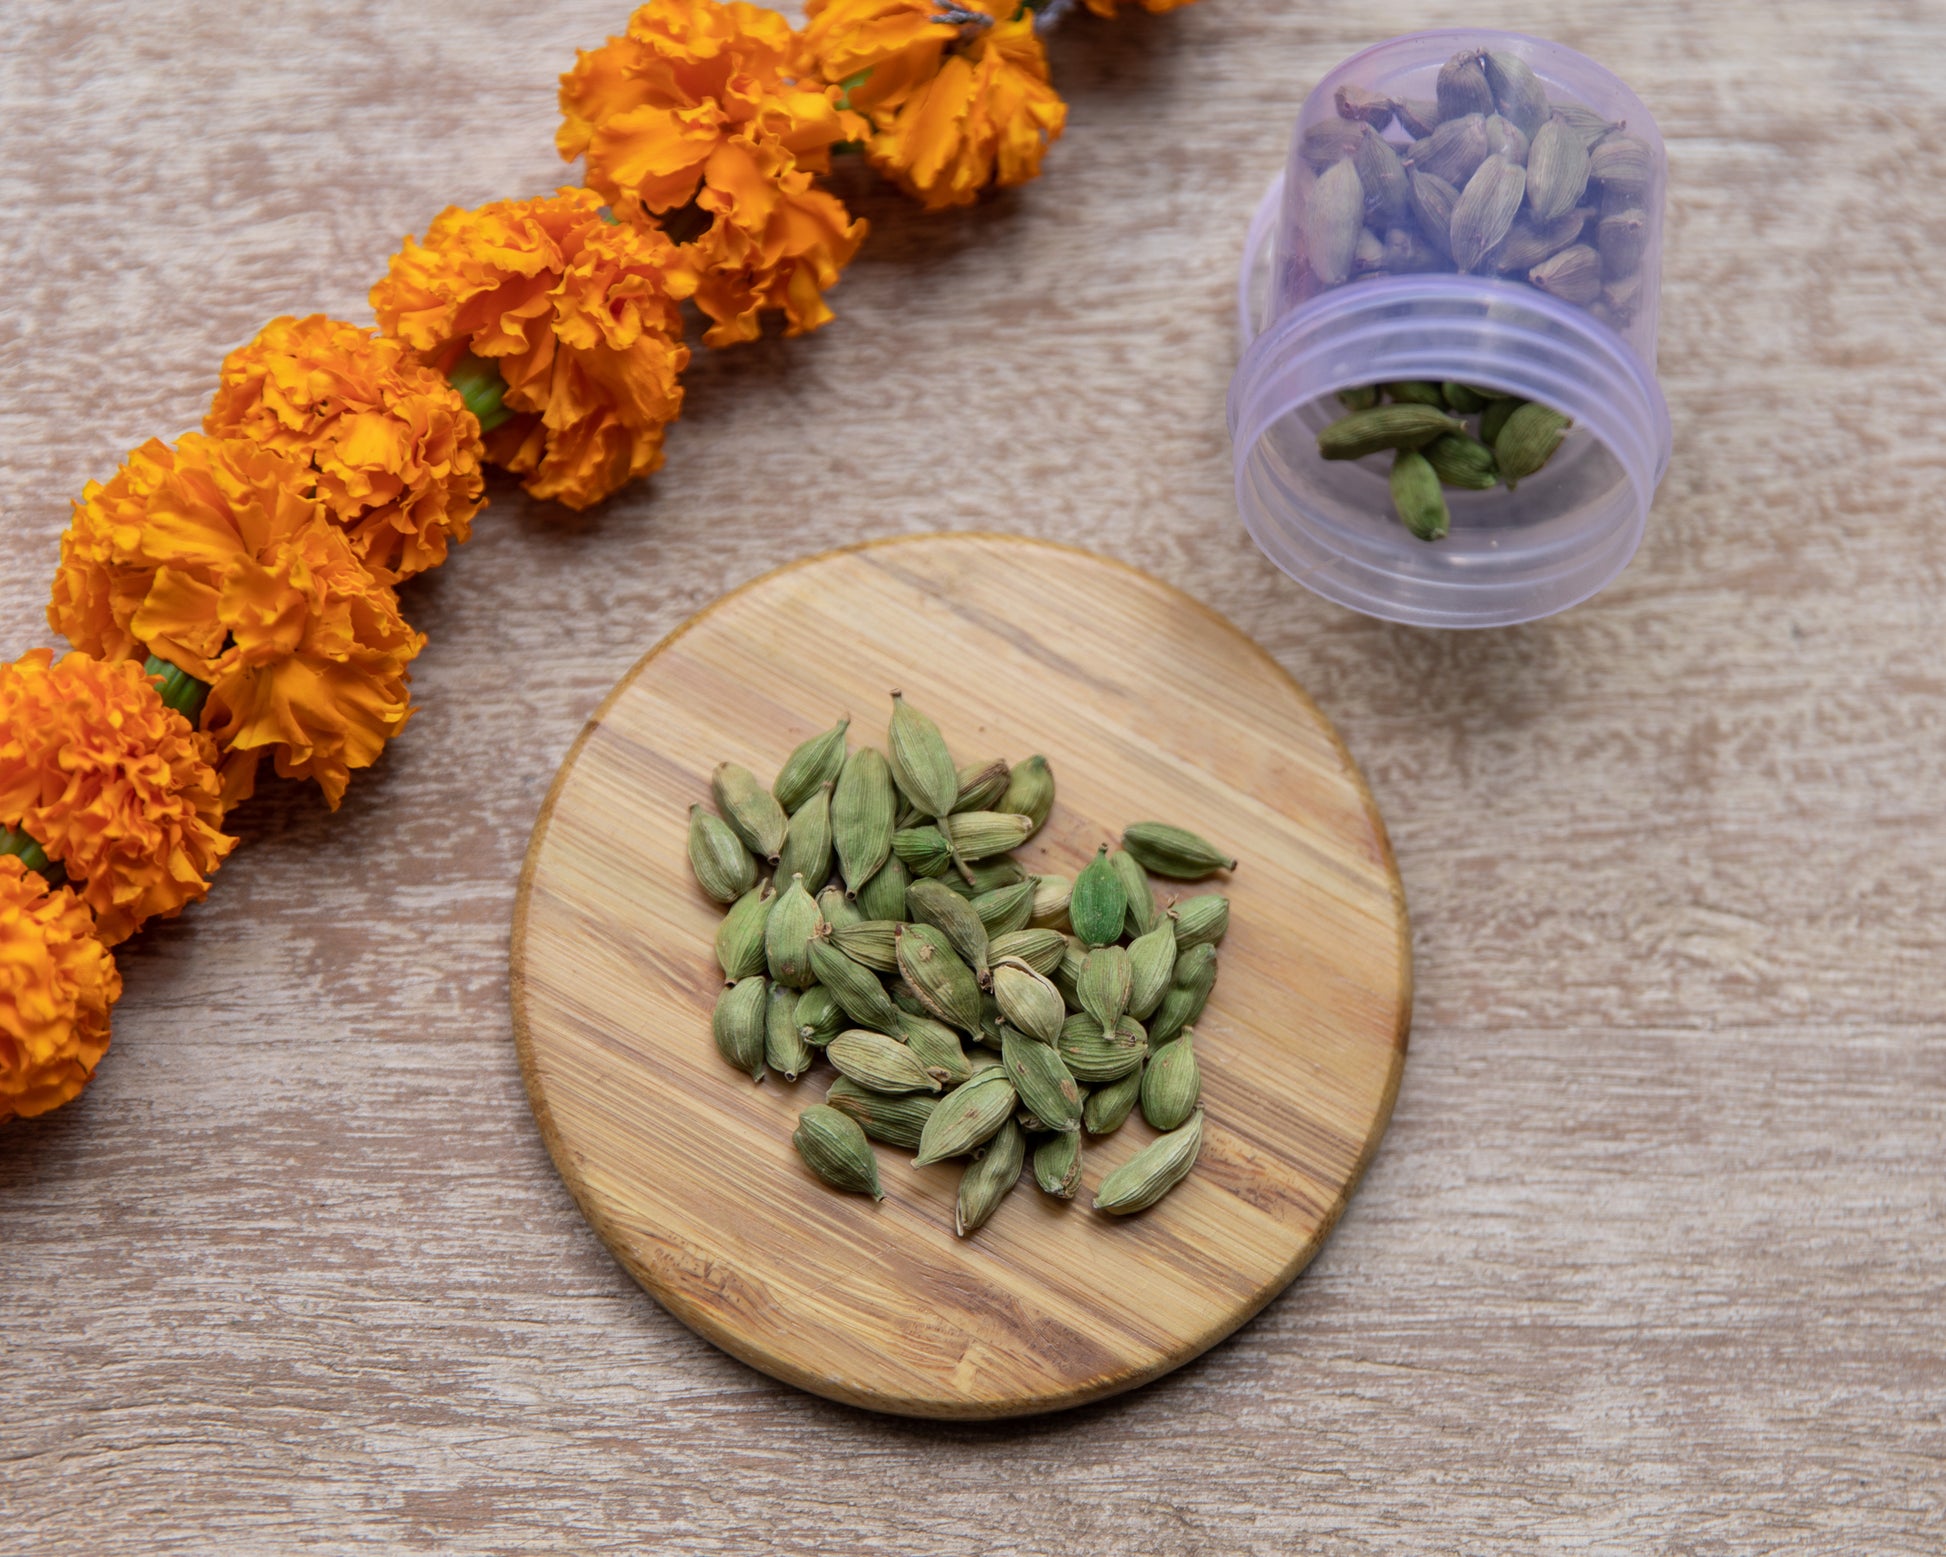 Elaichi, or cardamom, stands as a symbol of purity, fragrance, and spiritual awakening.